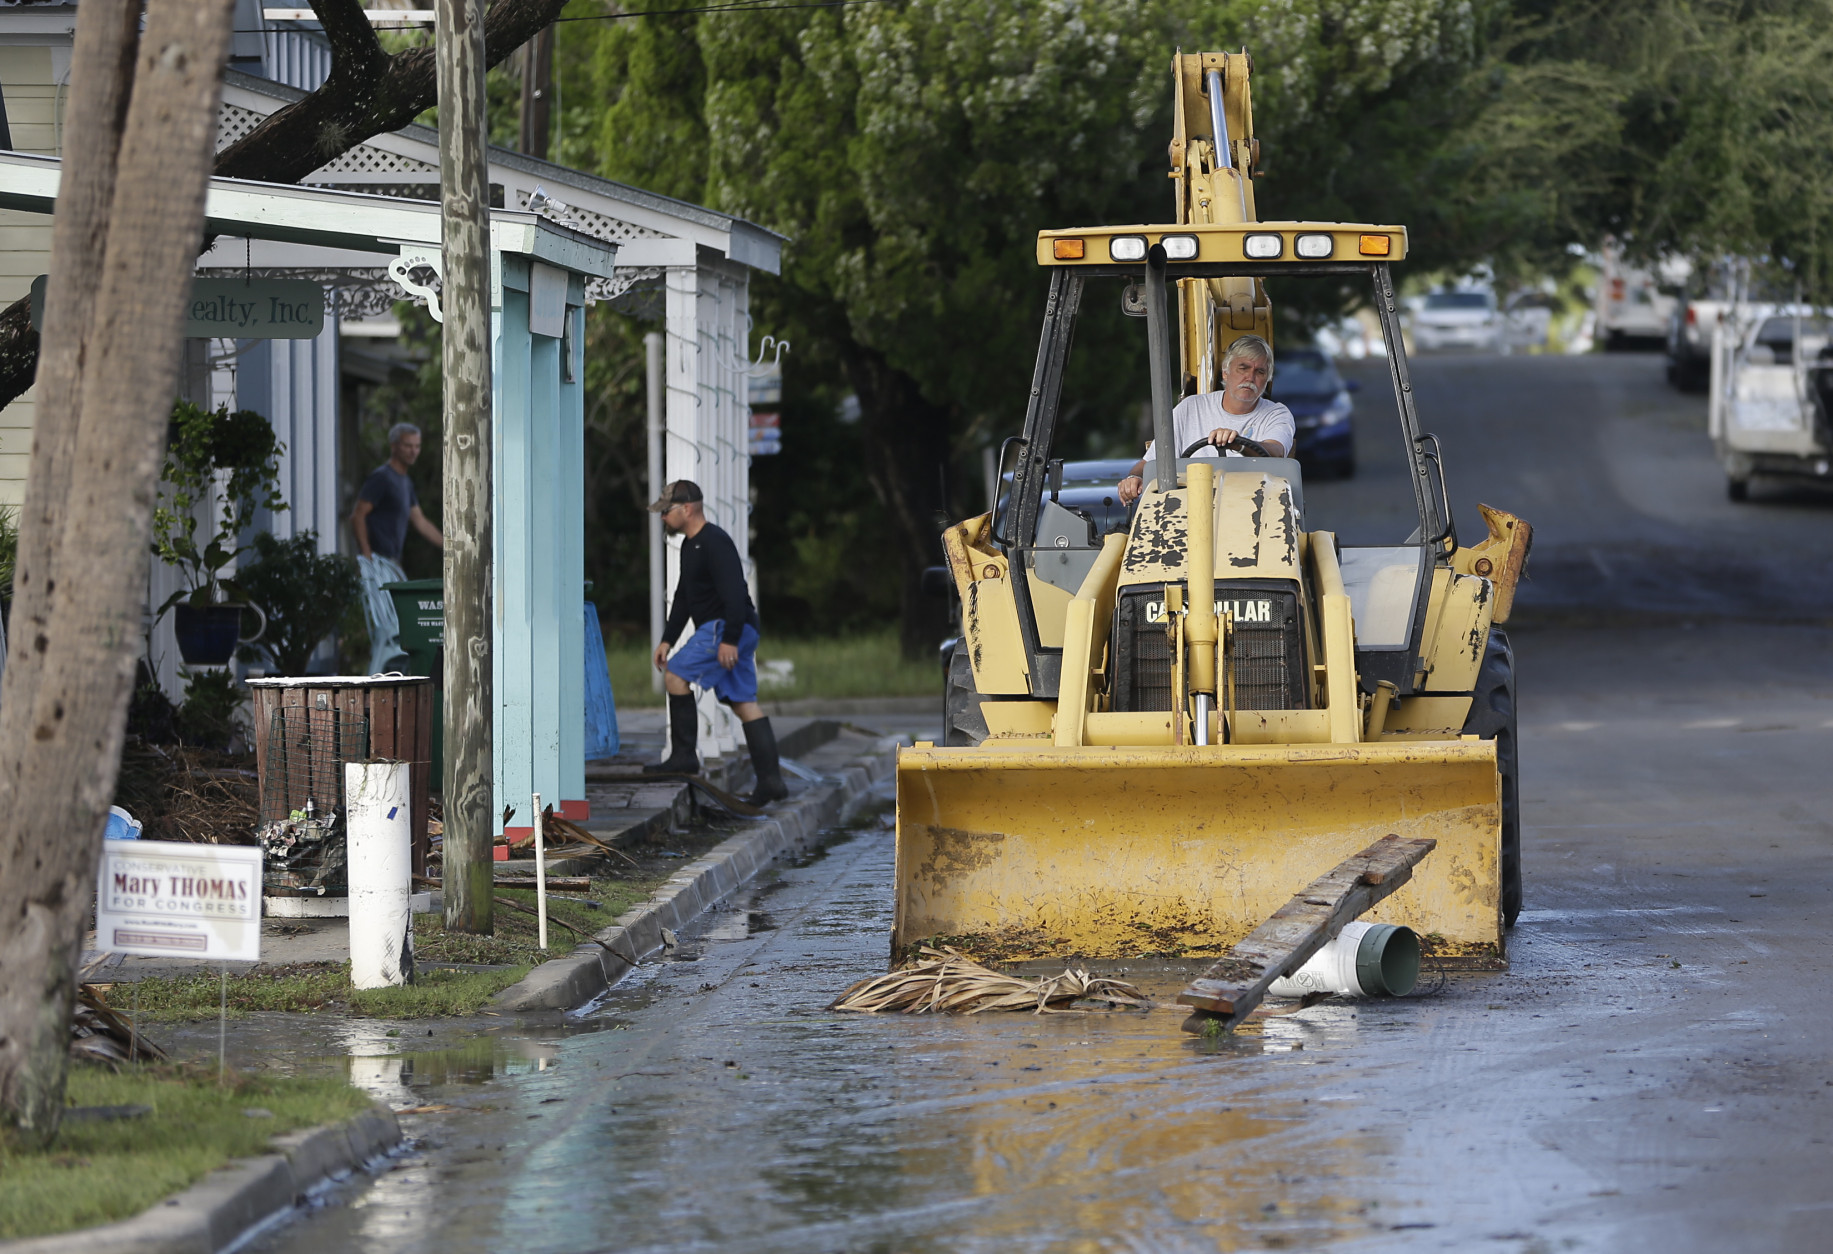 A front end loader clears debris from the street after Hurricane Hermine passed through Friday, Sept. 2, 2016, in Cedar Key, Fla. Hermine was downgraded to a tropical storm after it made landfall. (AP Photo/John Raoux)